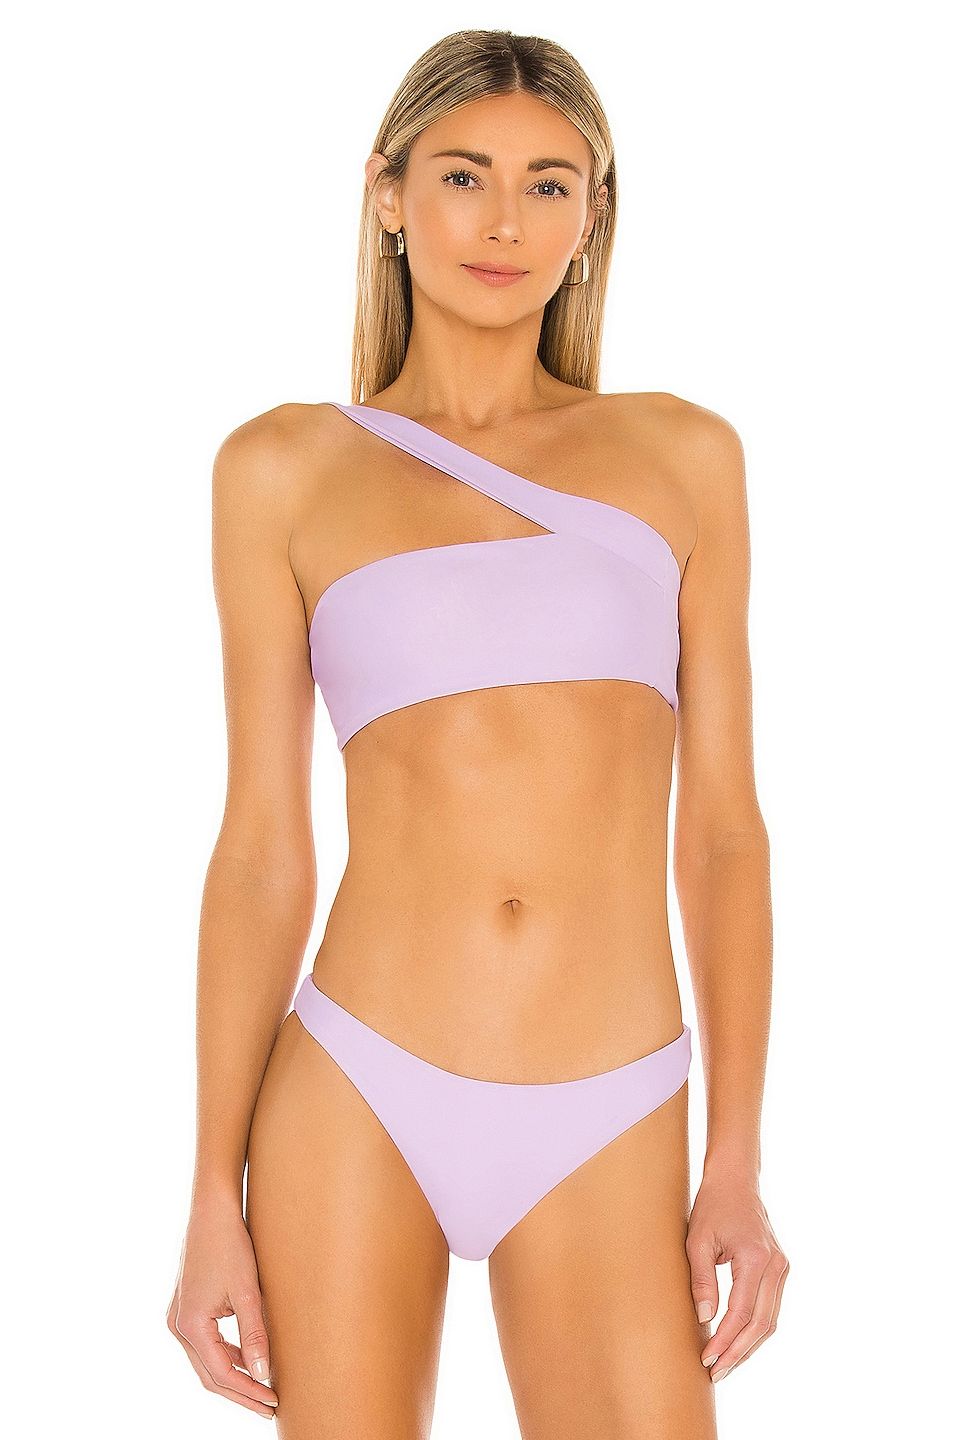  Bathing Suit For Small Chest Women